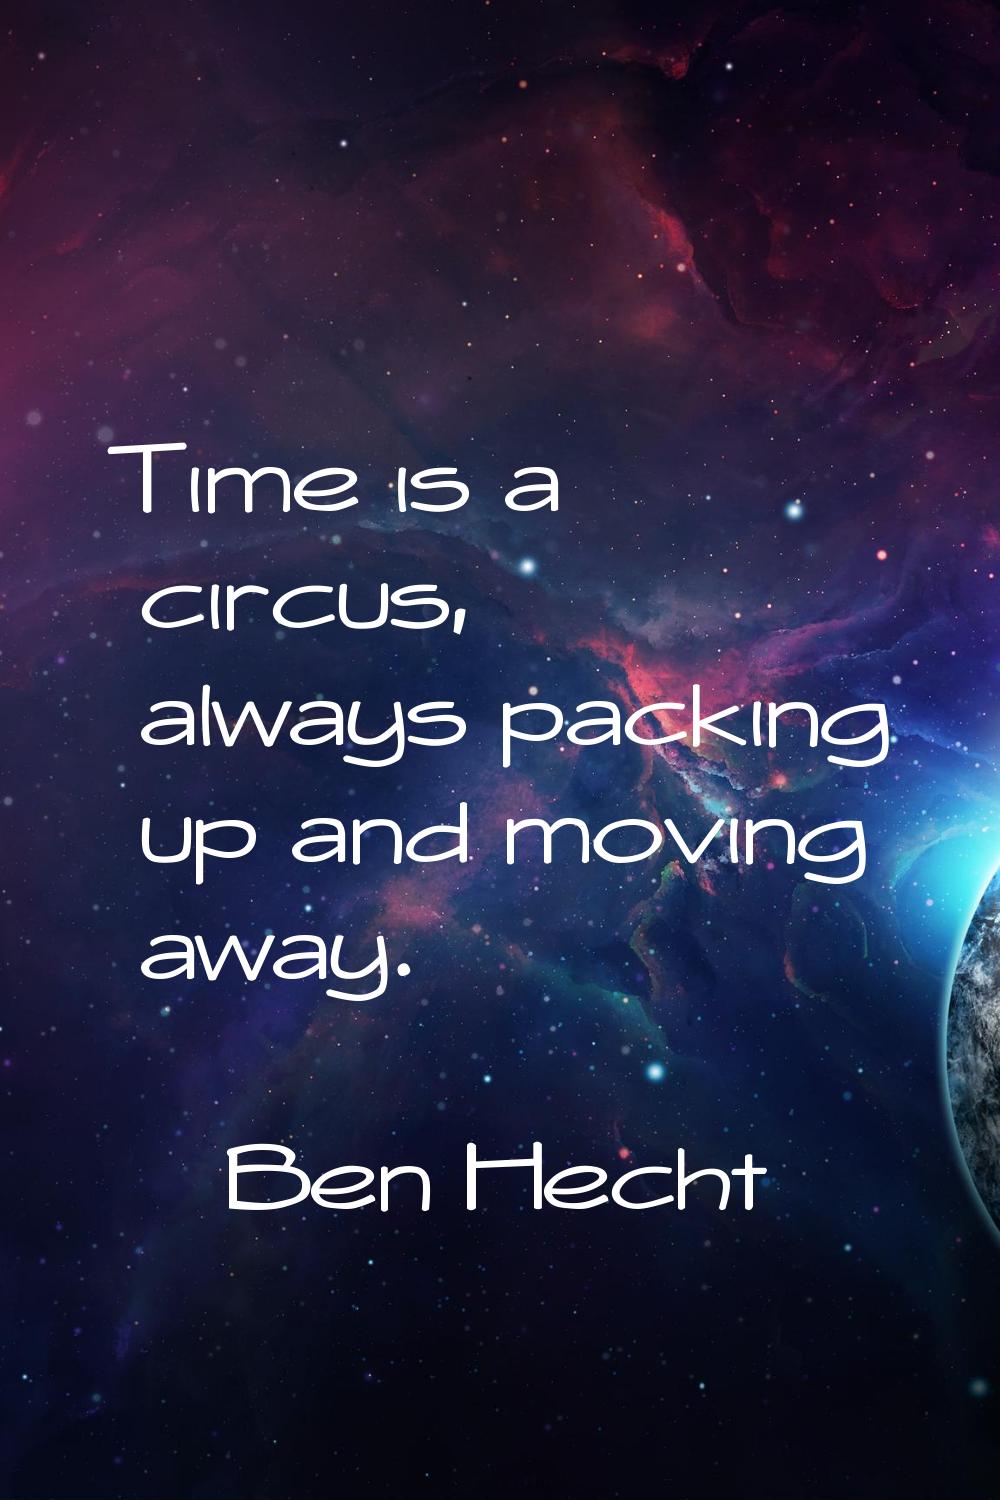 Time is a circus, always packing up and moving away.